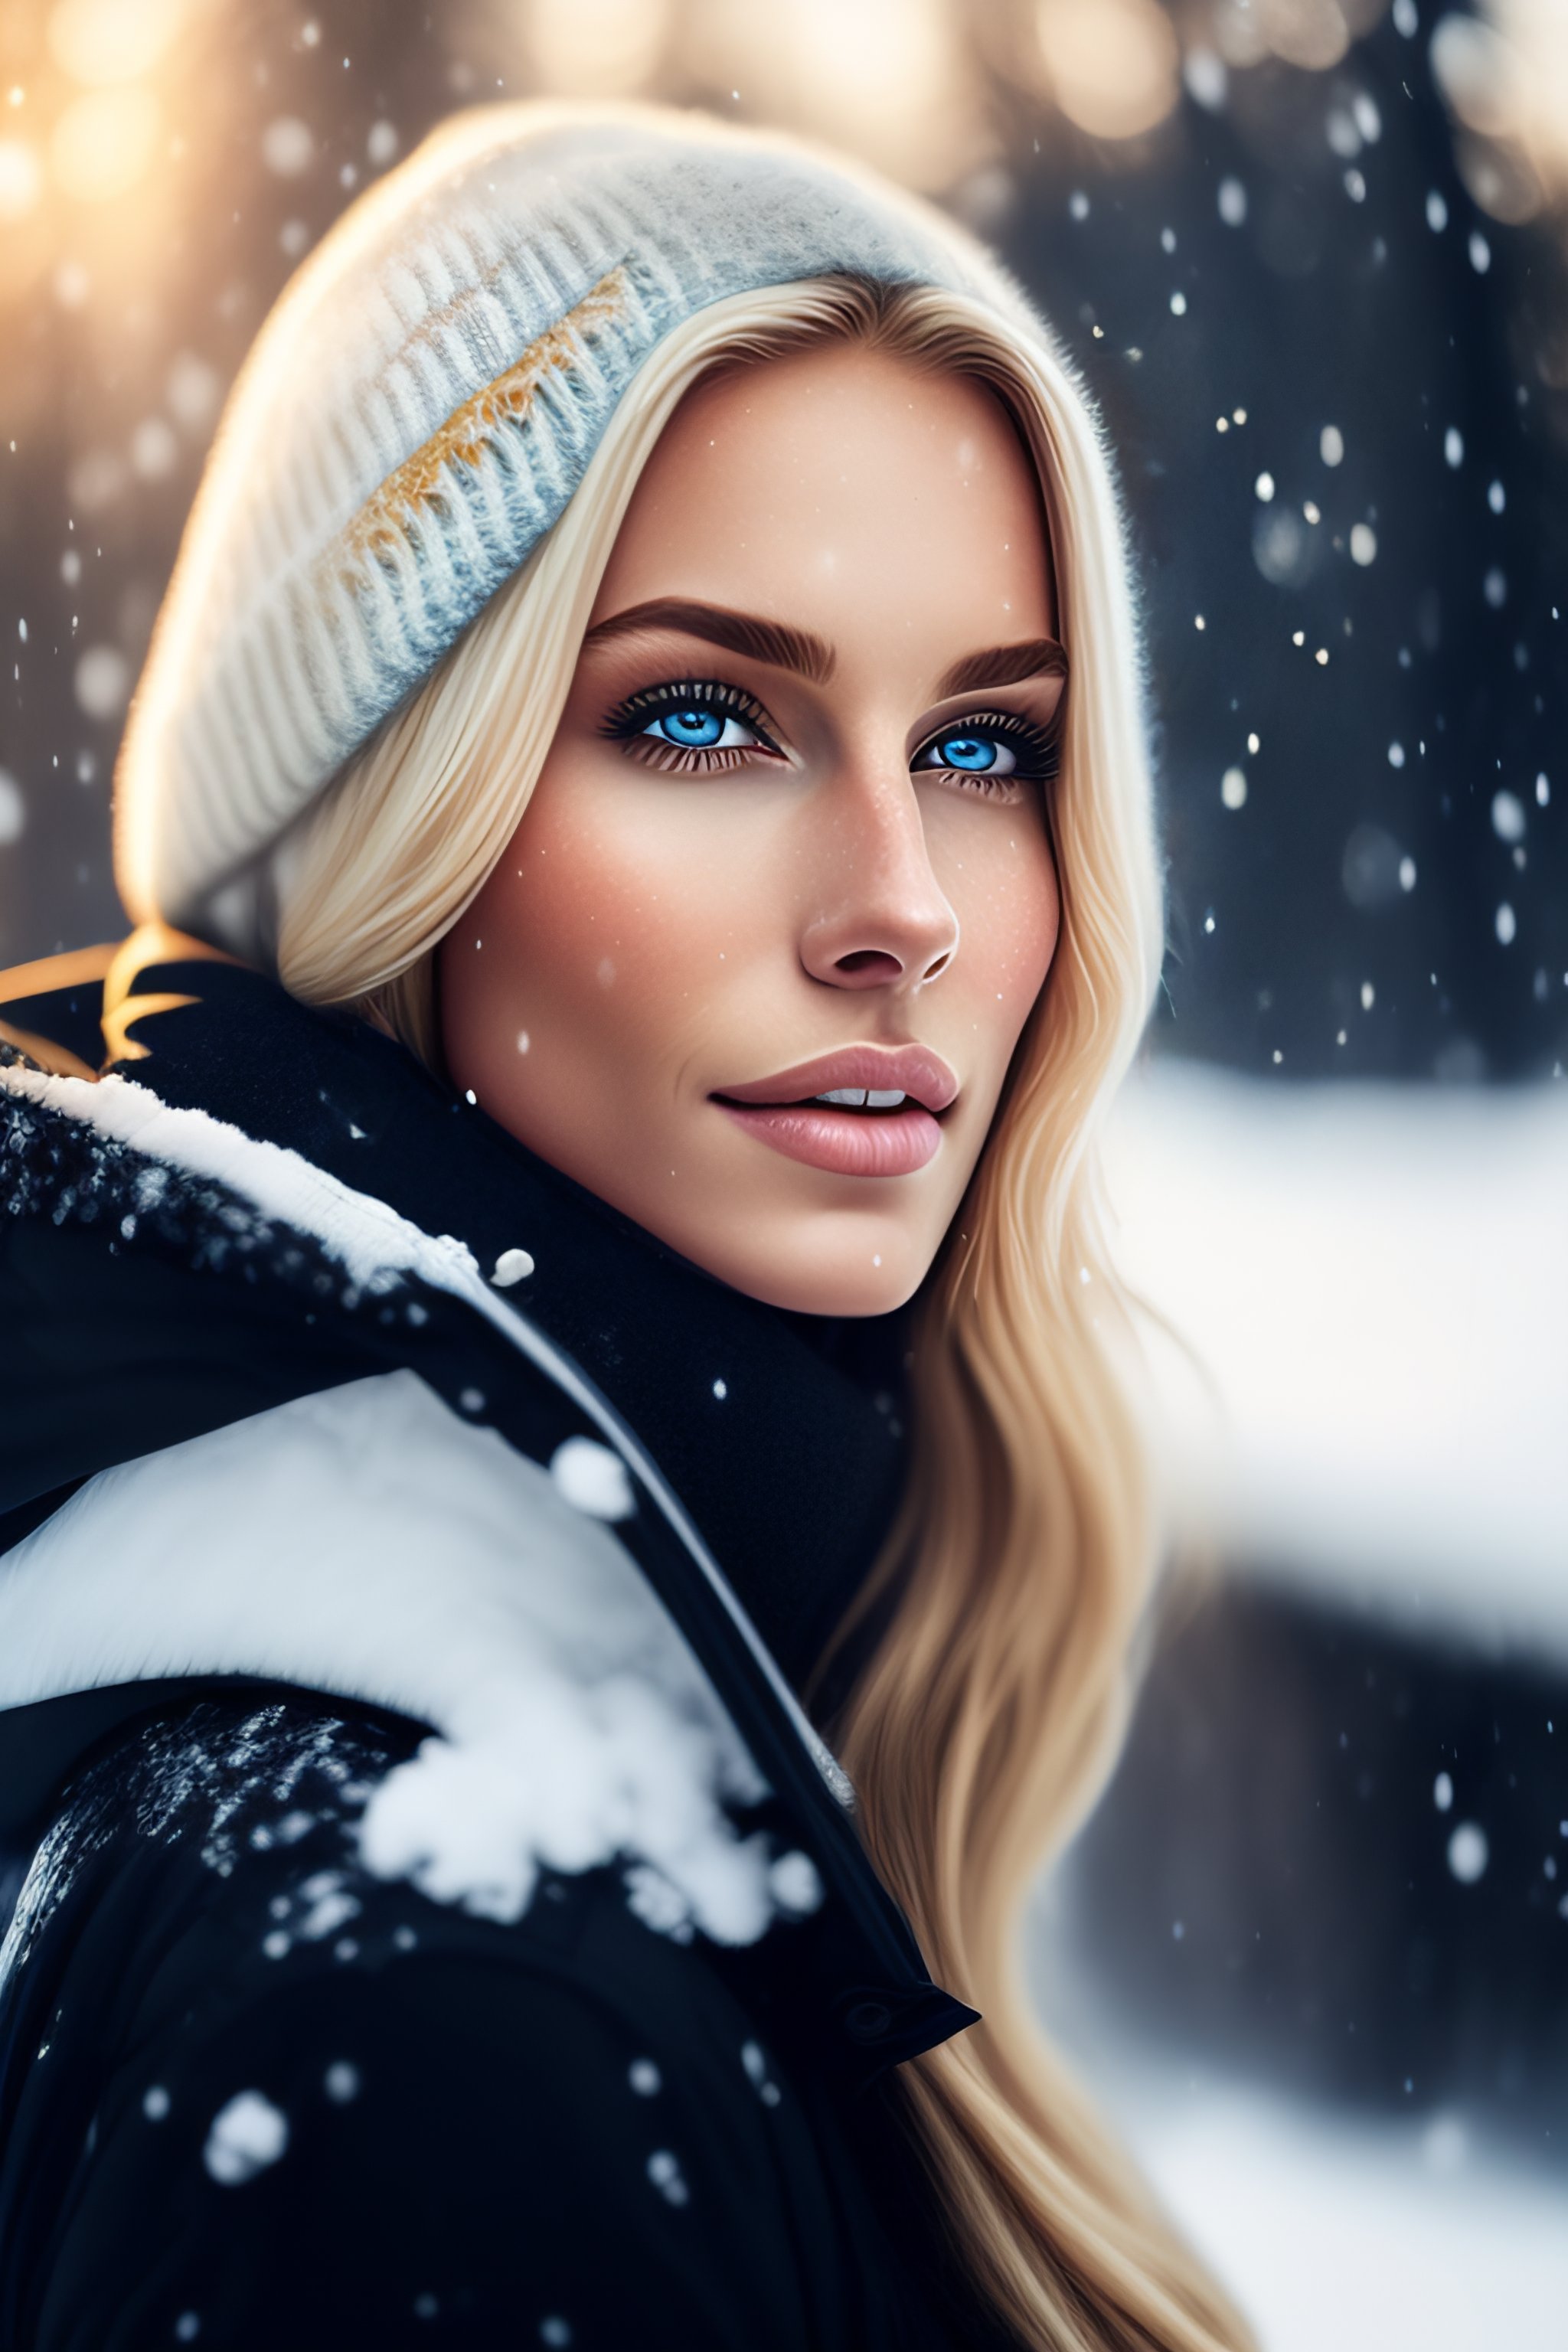 Lexica - Portrait of beautiful blonde lady playing in snow